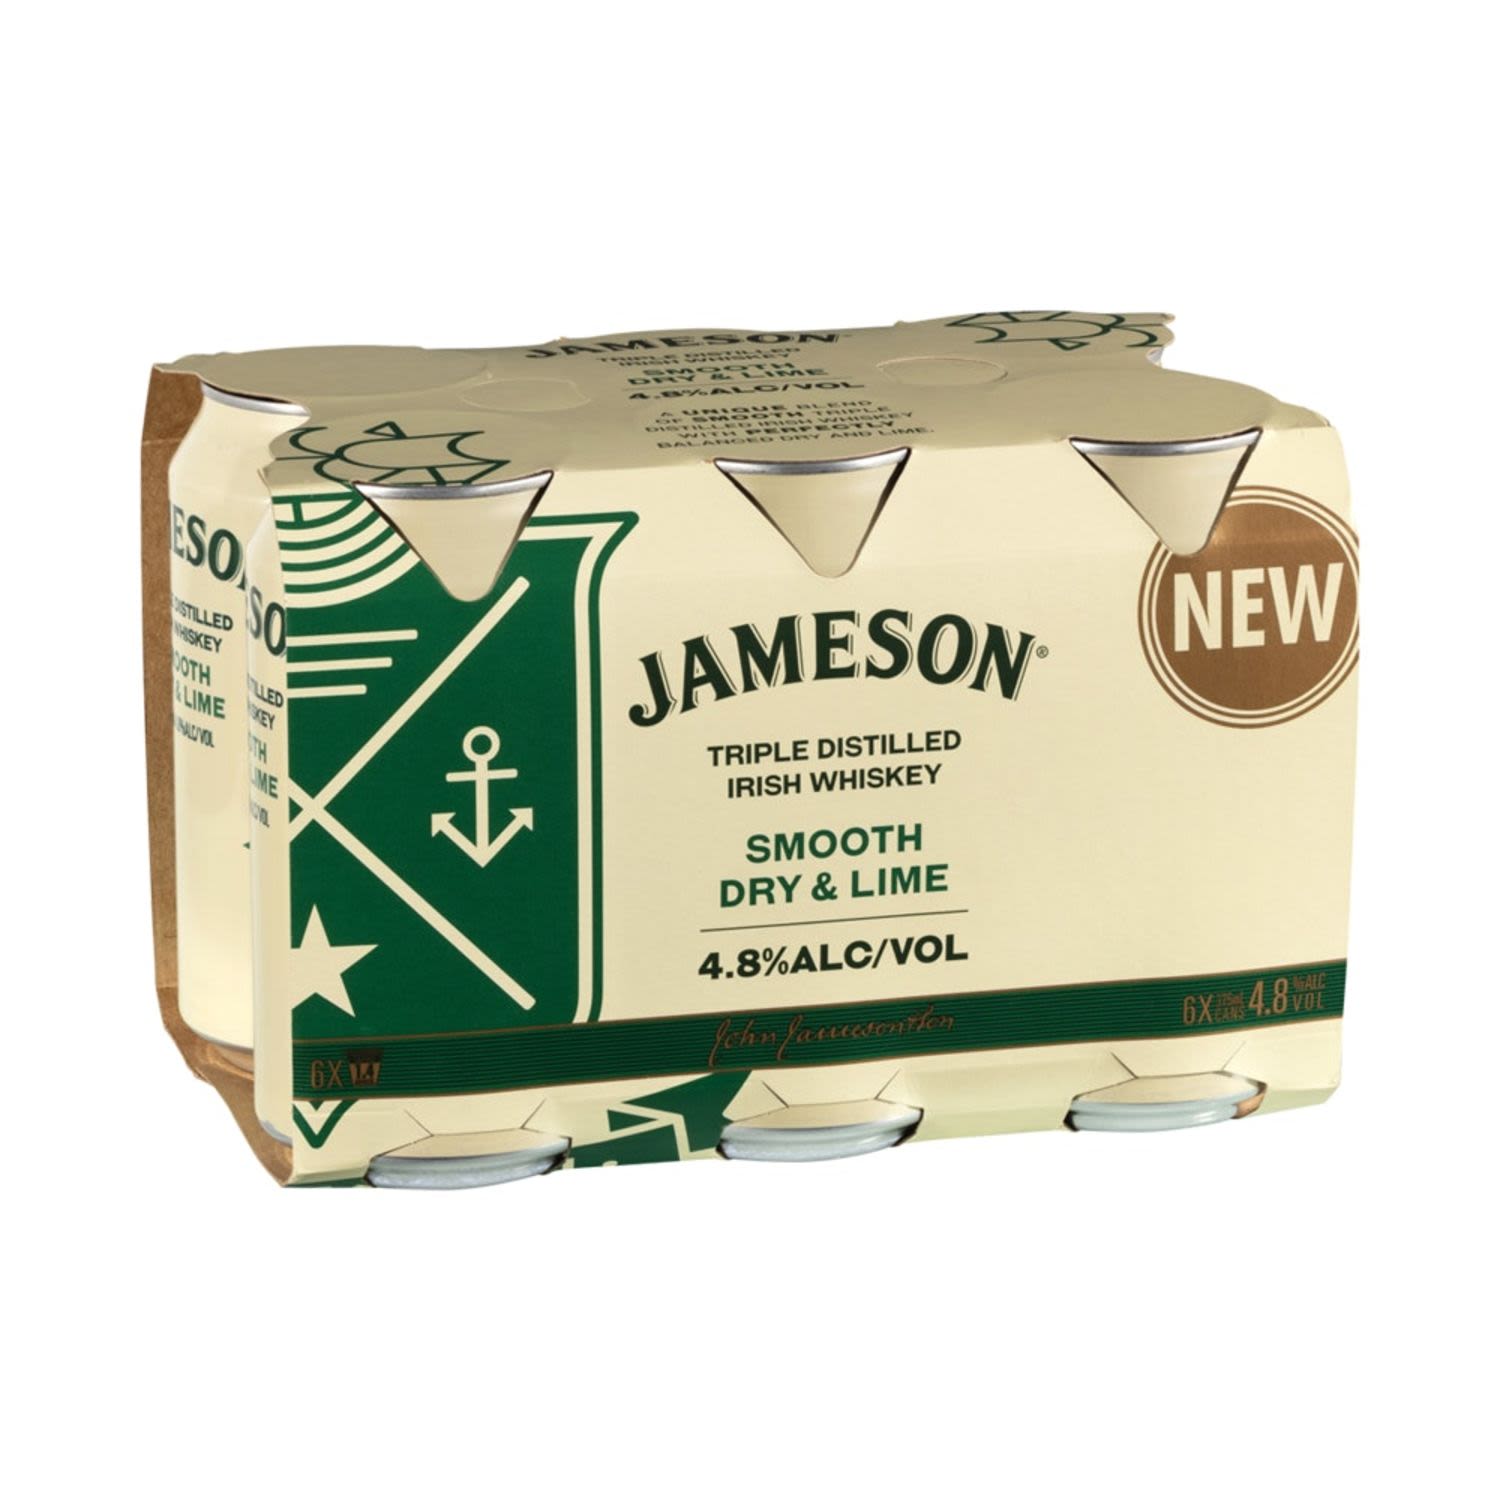 Jameson Smooth Dry & Lime 4.8% Can 375mL 6 Pack